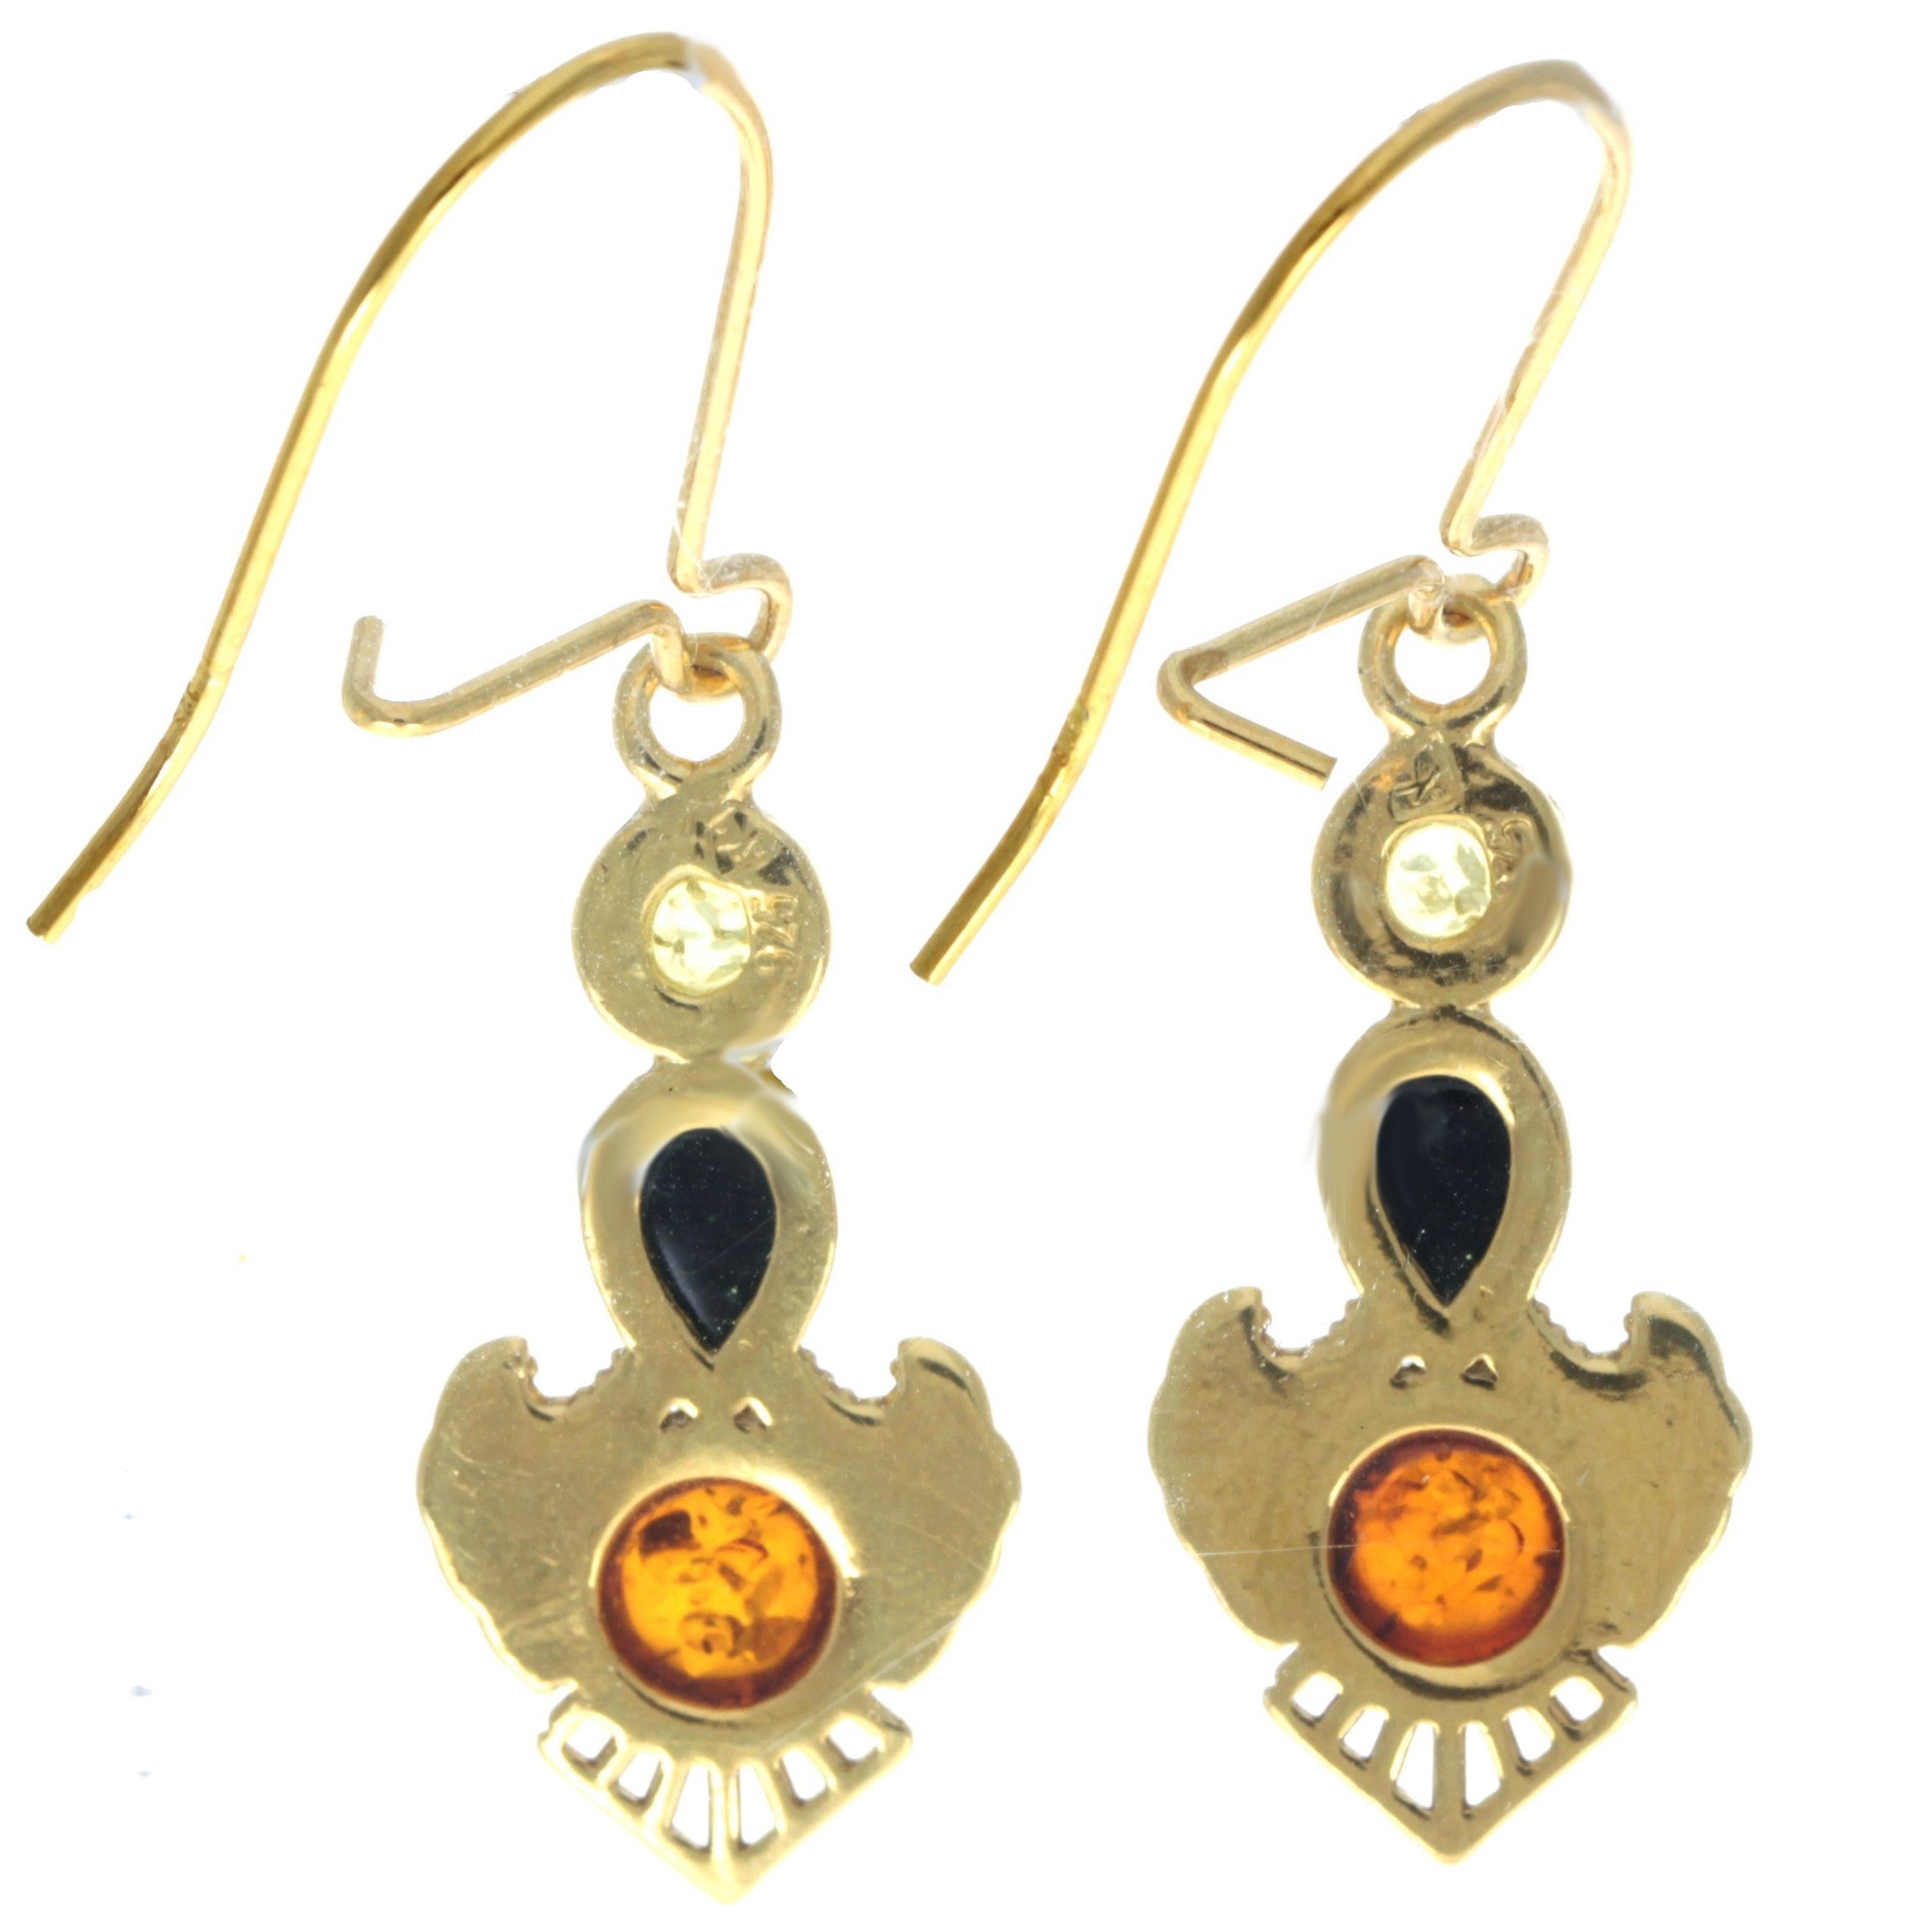 925 Sterling Silver 22 Carat Gold Plated with Genuine Baltic Amber Drop Earrings - MG002